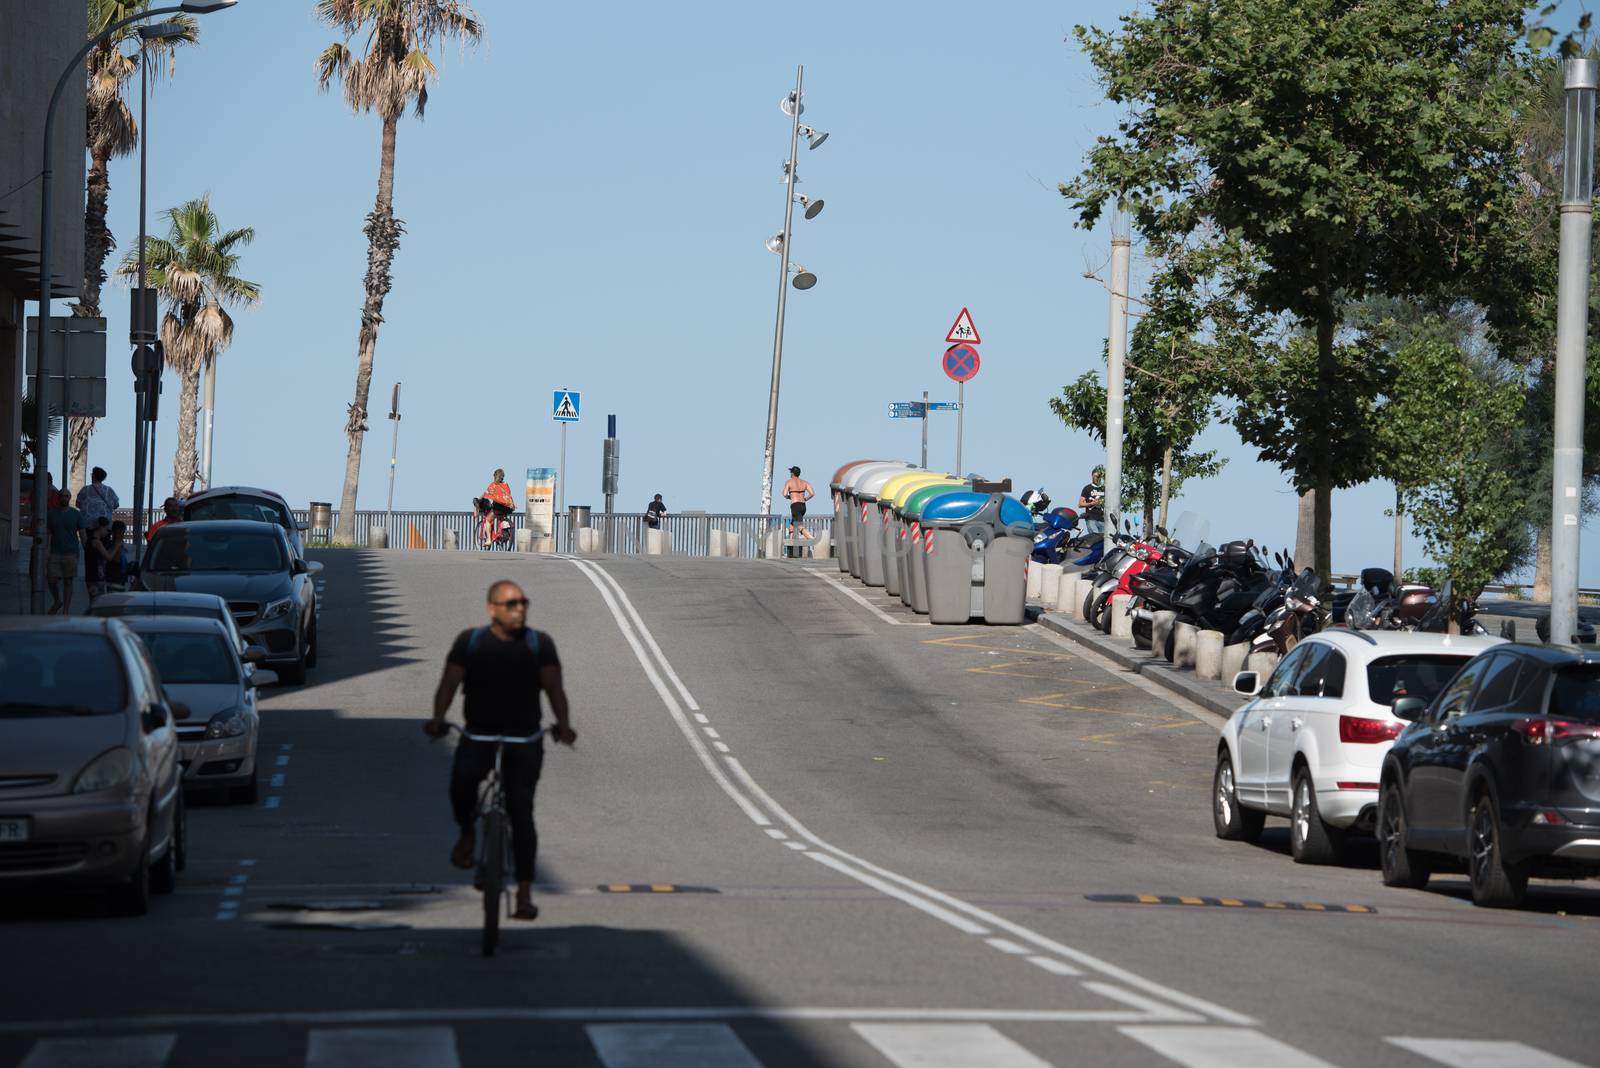 BARCELONA - JUNE 26, 2020: Street on Barceloneta beach with people from Barceloneta after COVID 19 on June 26, 2020 in Barcelona, ​​Spain.